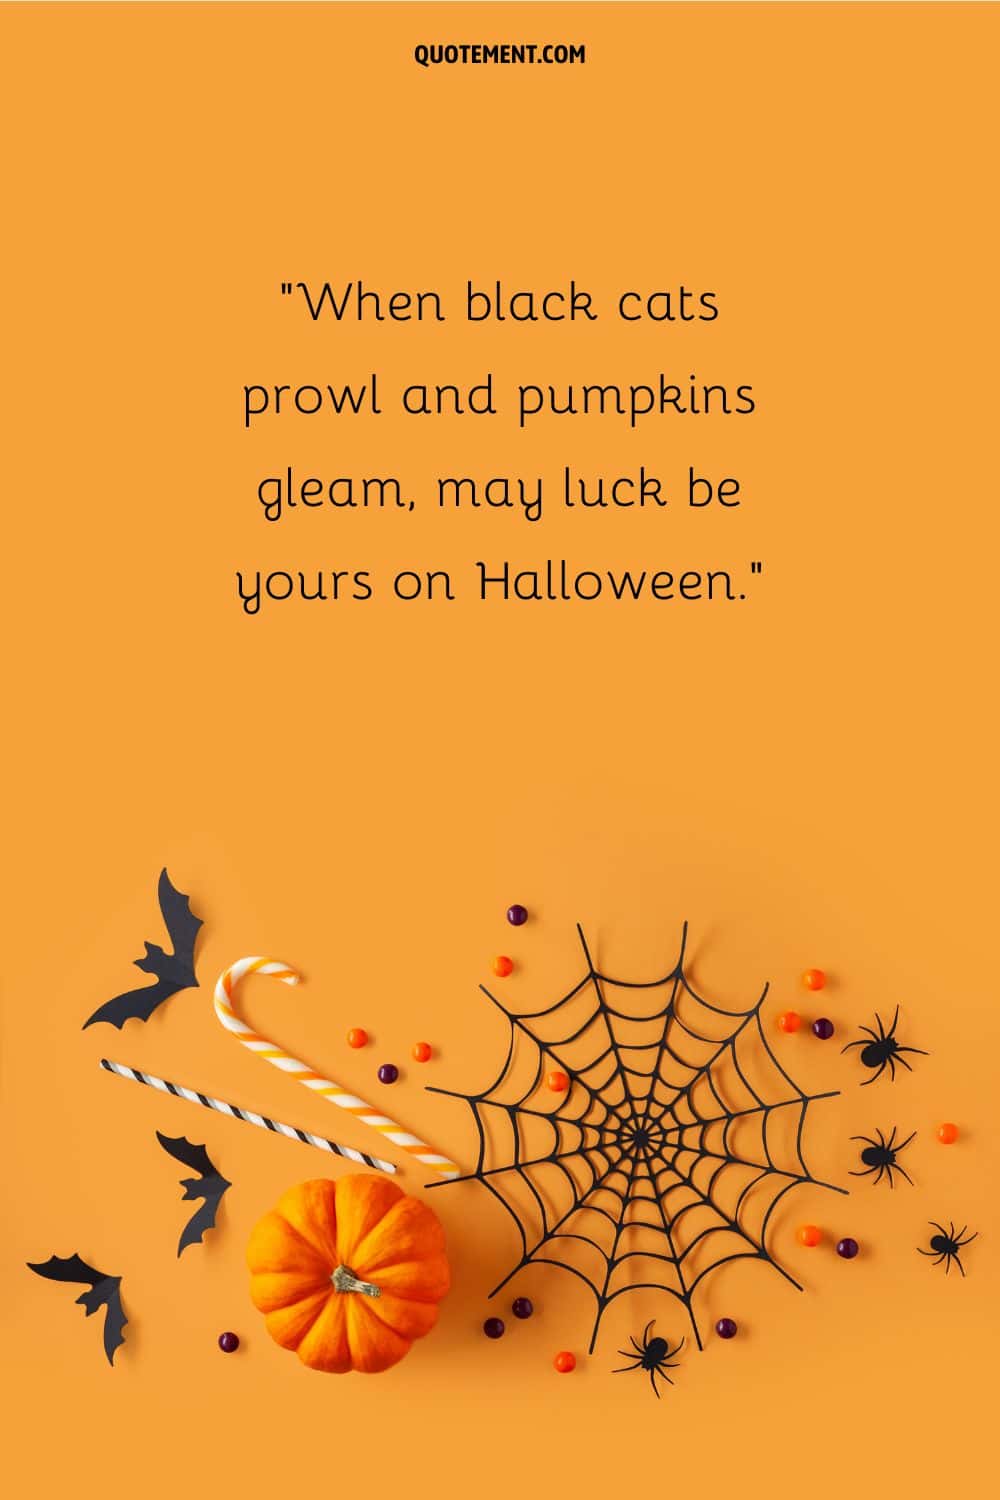 When black cats prowl and pumpkins gleam, may luck be yours on Halloween